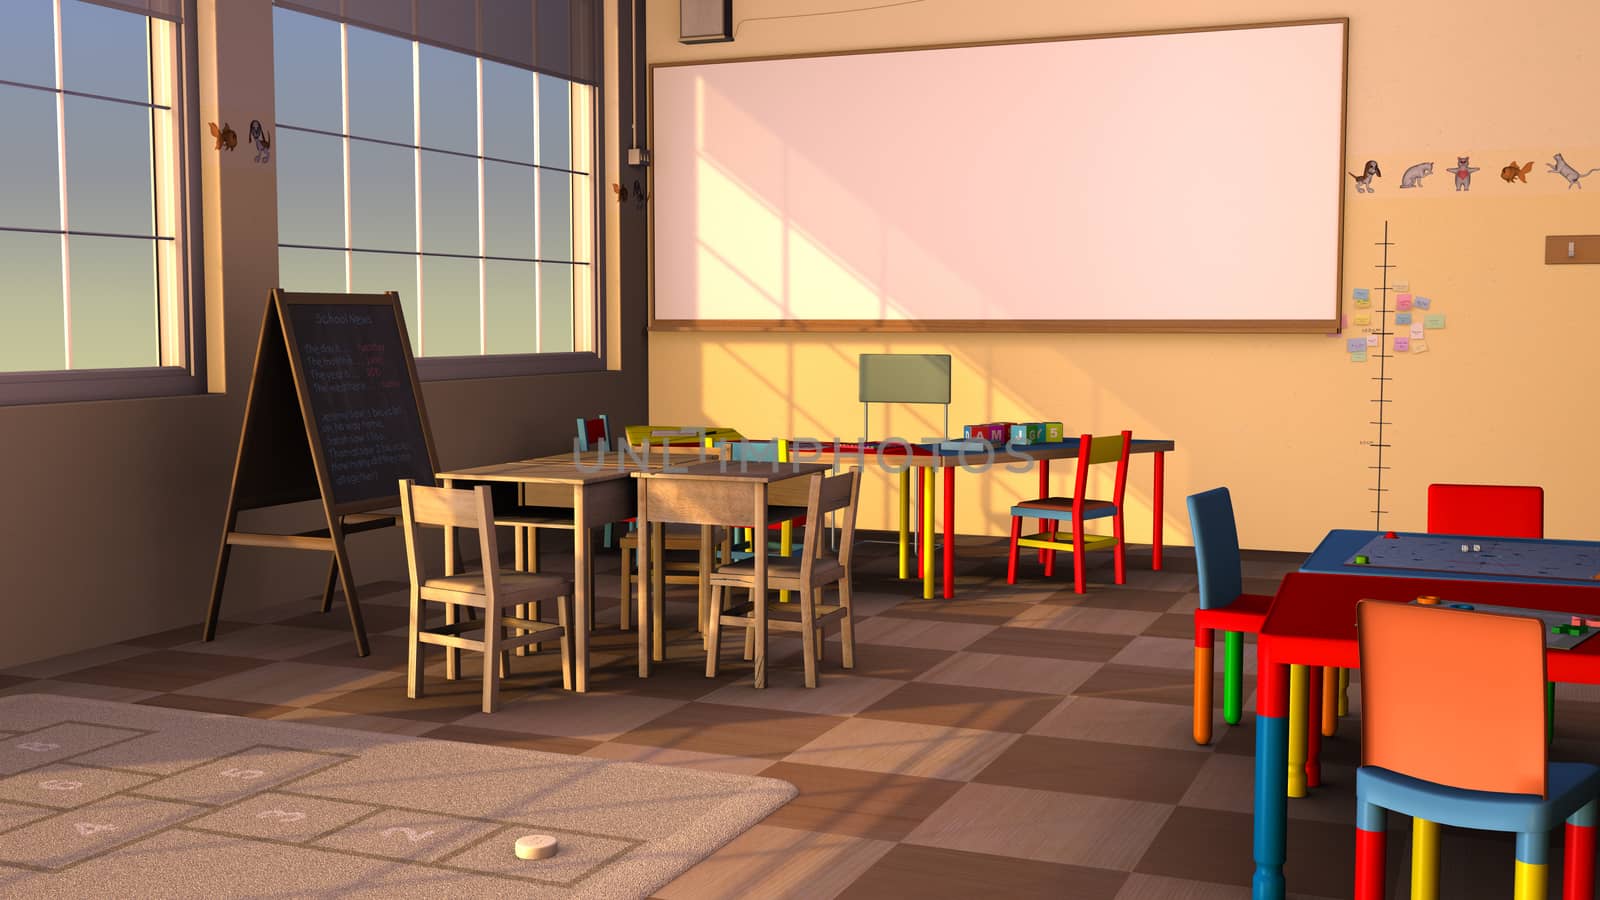 Play room, three-dimensional rendering of the interior with the use of global illumination